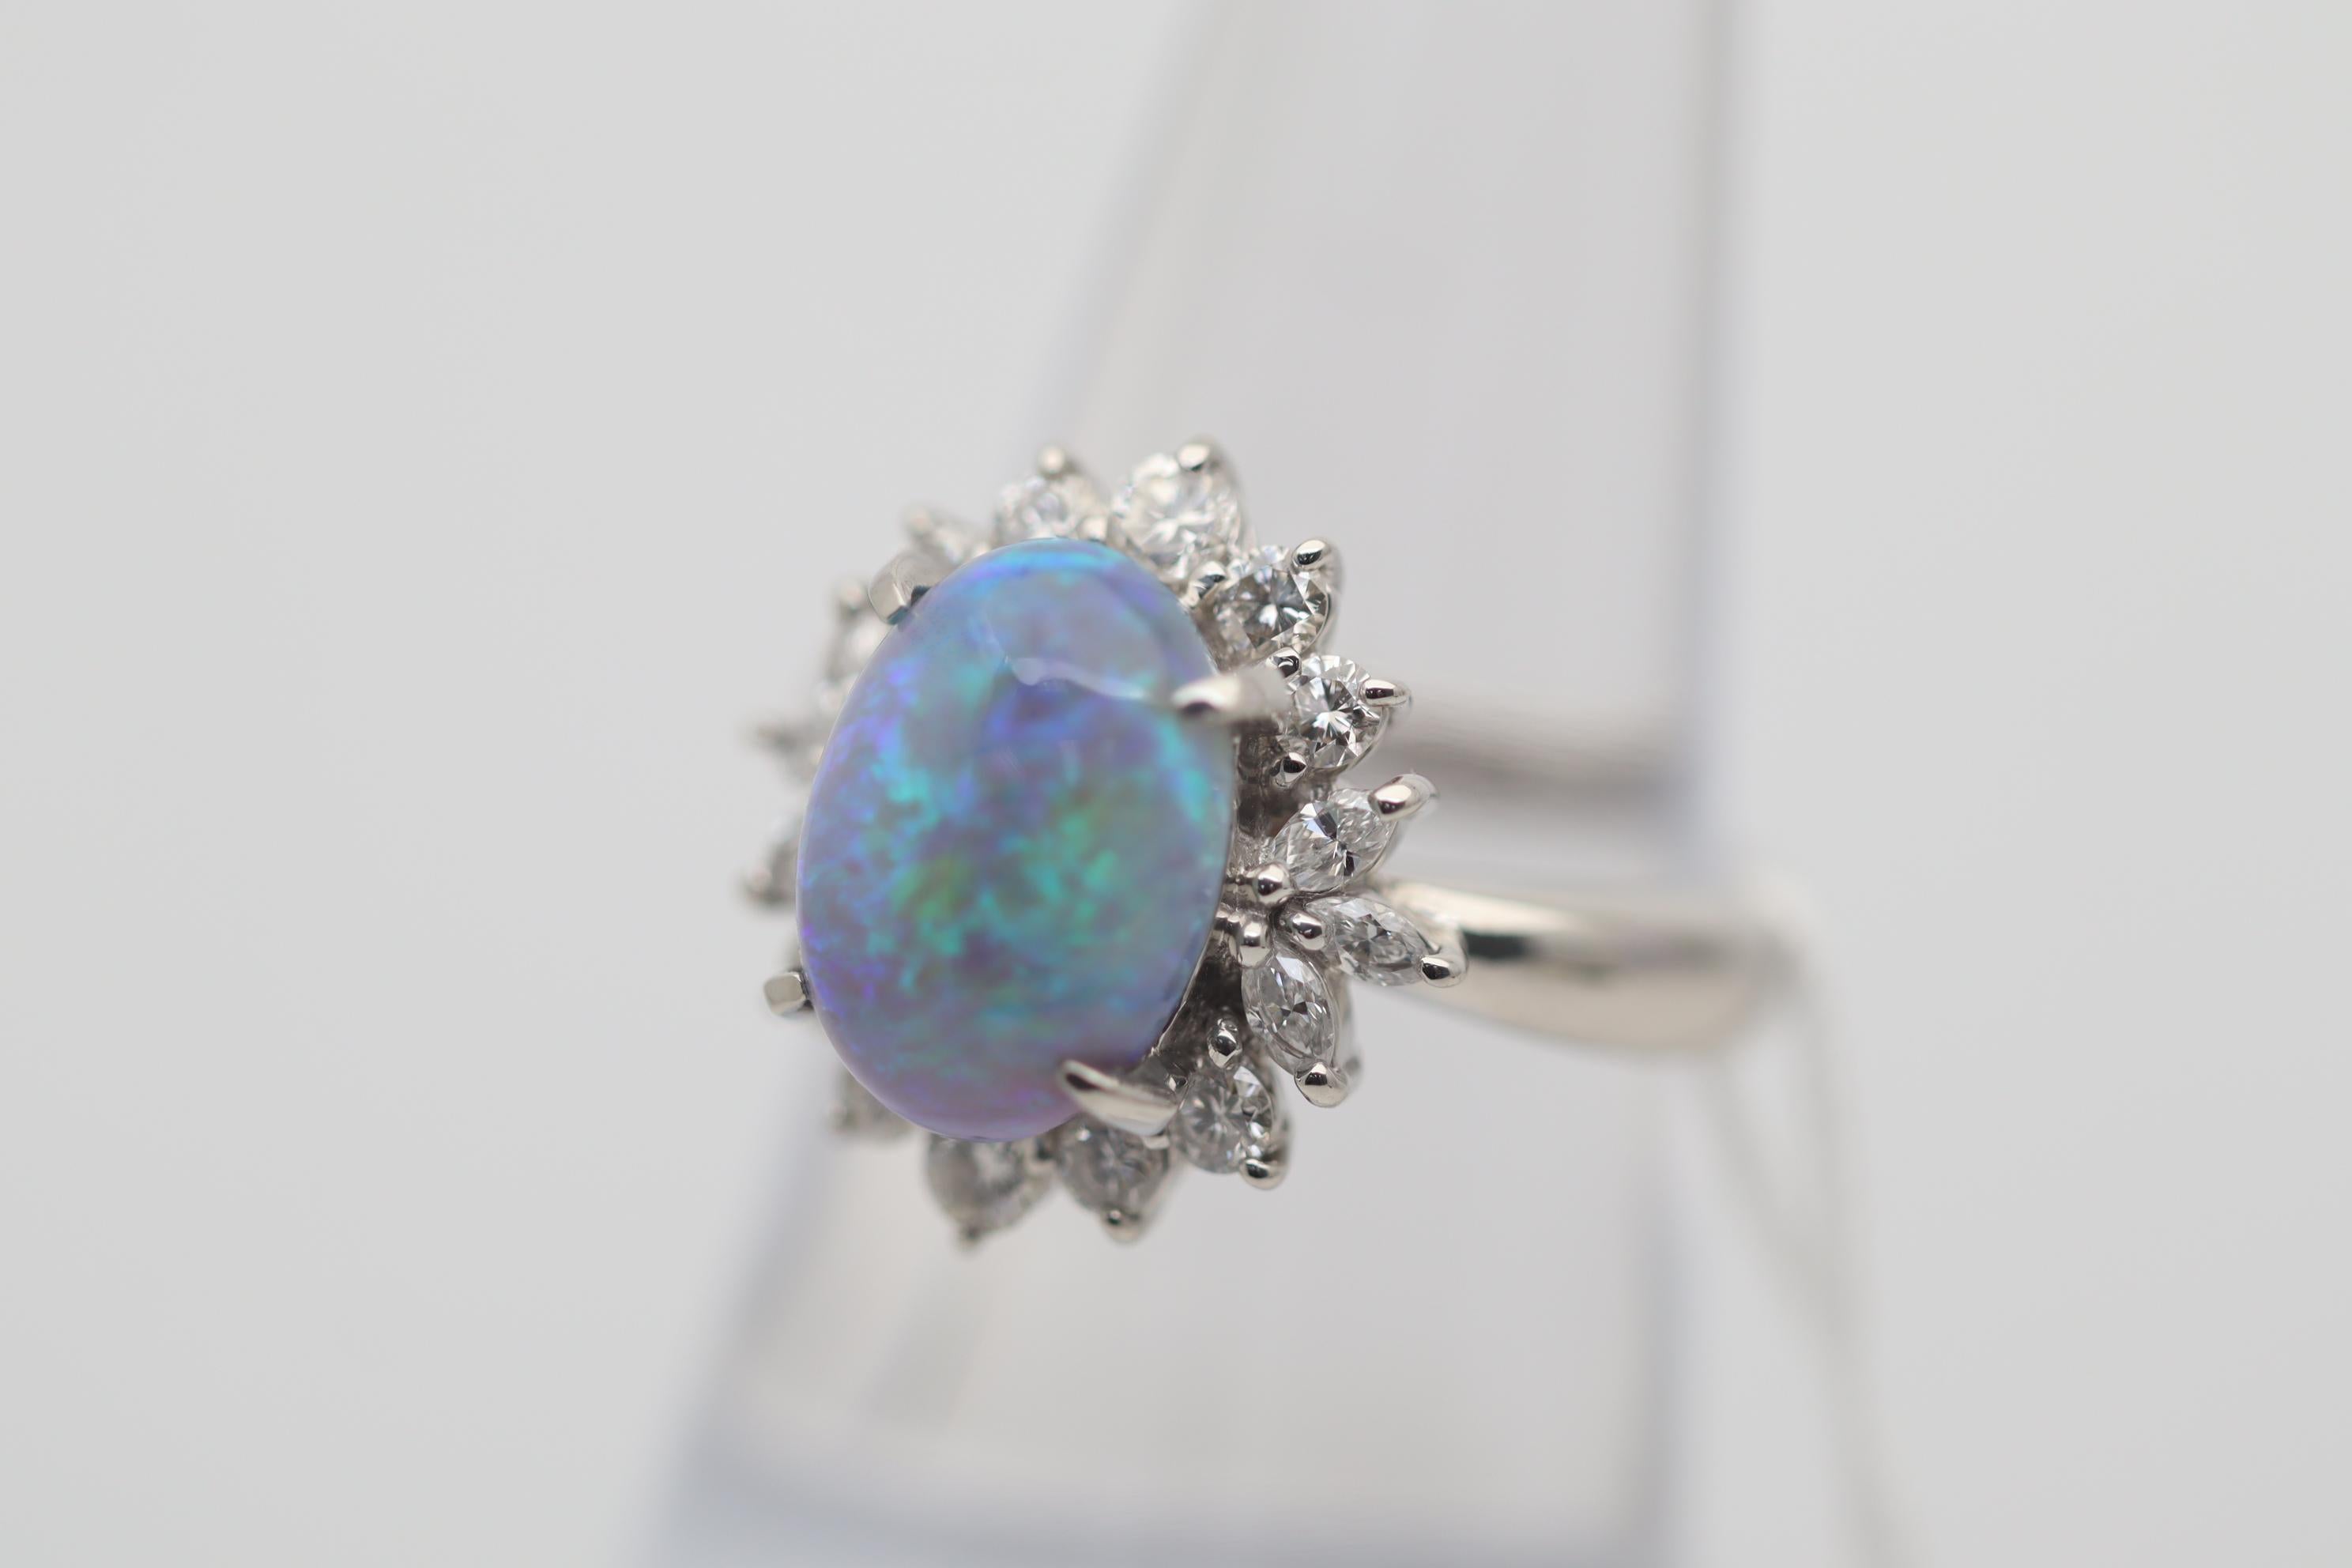 A lovely platinum ring featuring a 3.28 carat Australian crystal opal. It has great play of color as flashes of greens and blues dance across the stone. It is complemented by 0.77 carats of round-brilliant and marquise-shape diamonds set around the